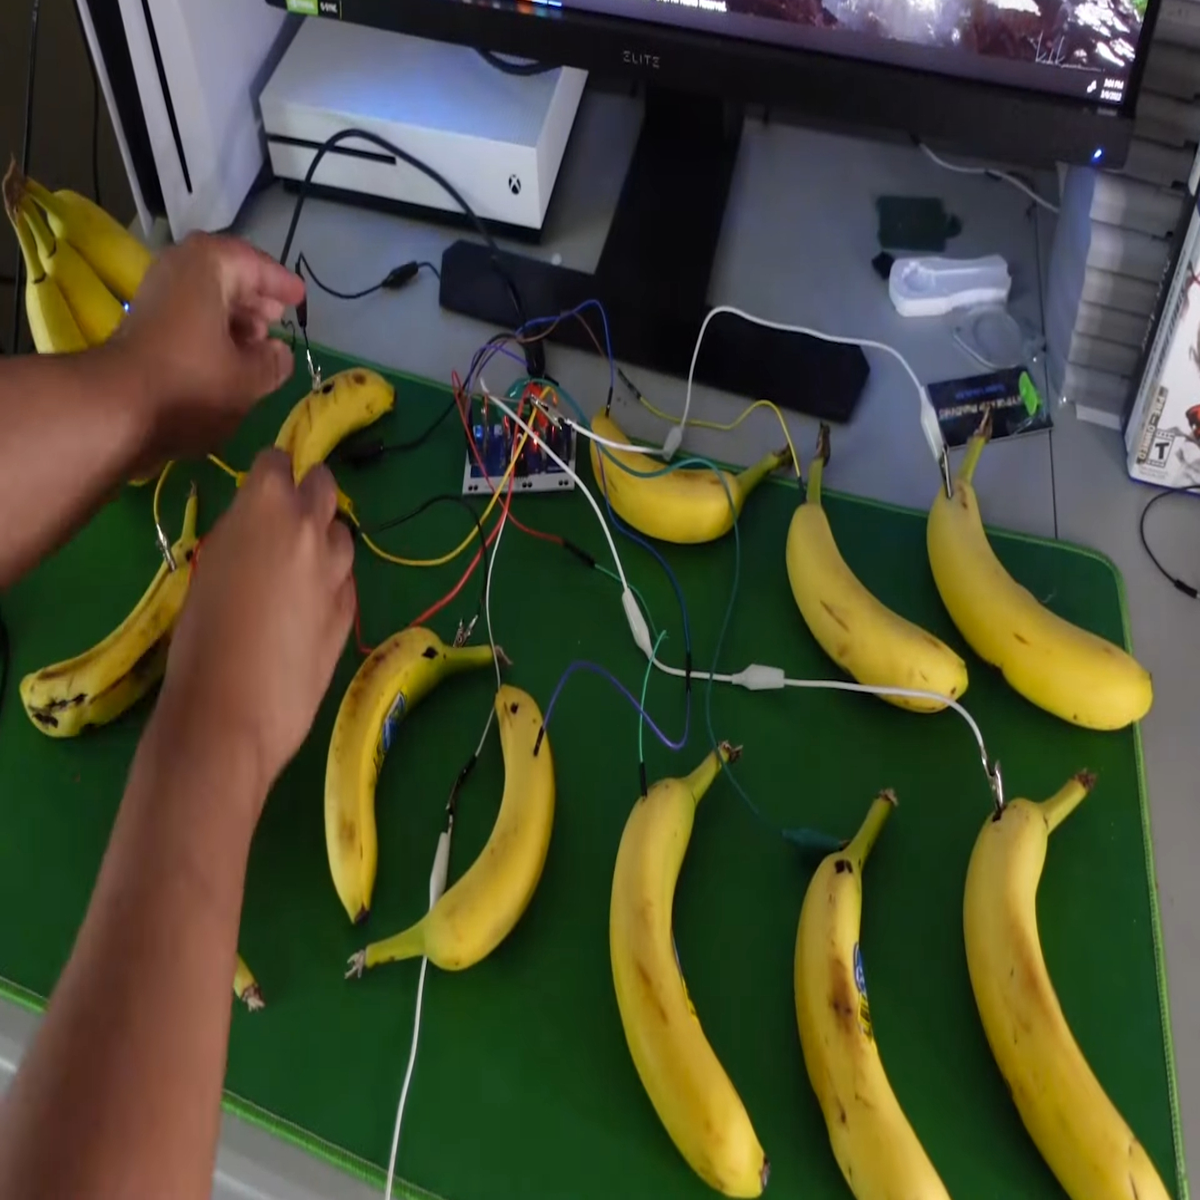 Grocery Chain No Frills Gets Back to Gaming With Banana Controllers